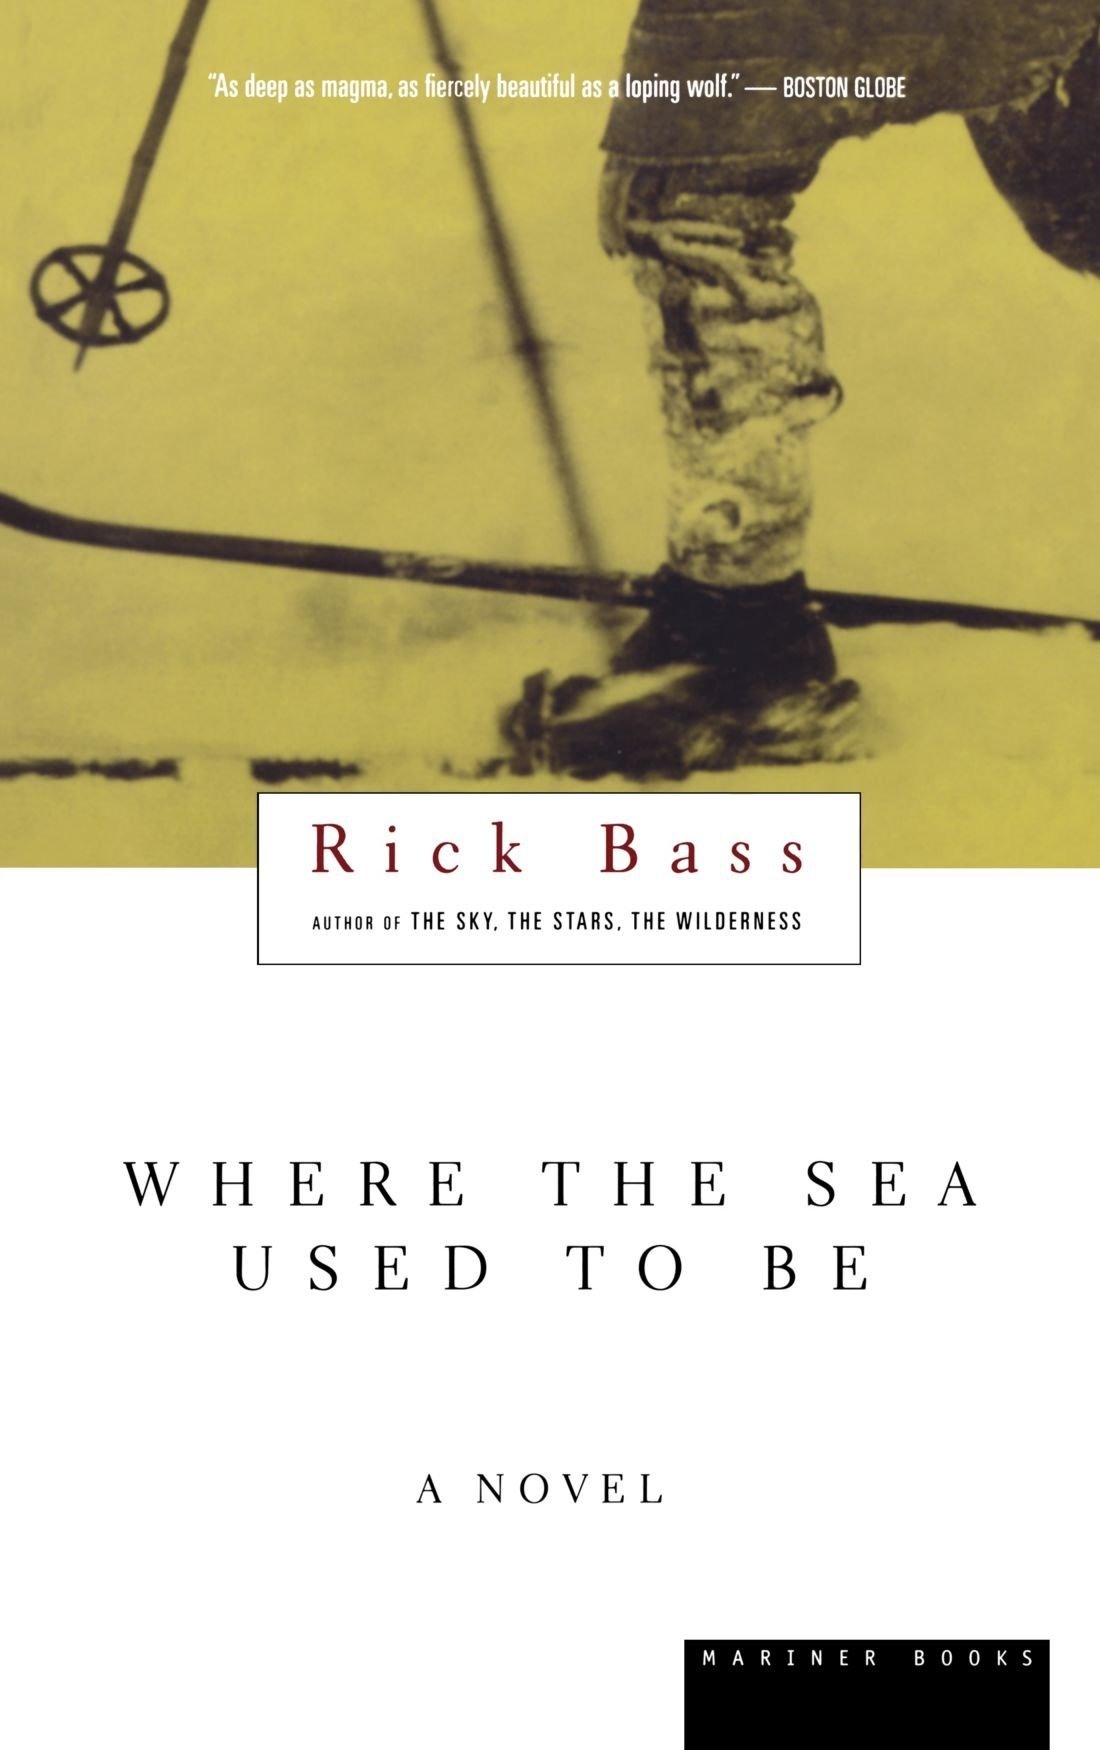 Where the Sea Used to Be by Rick Bass